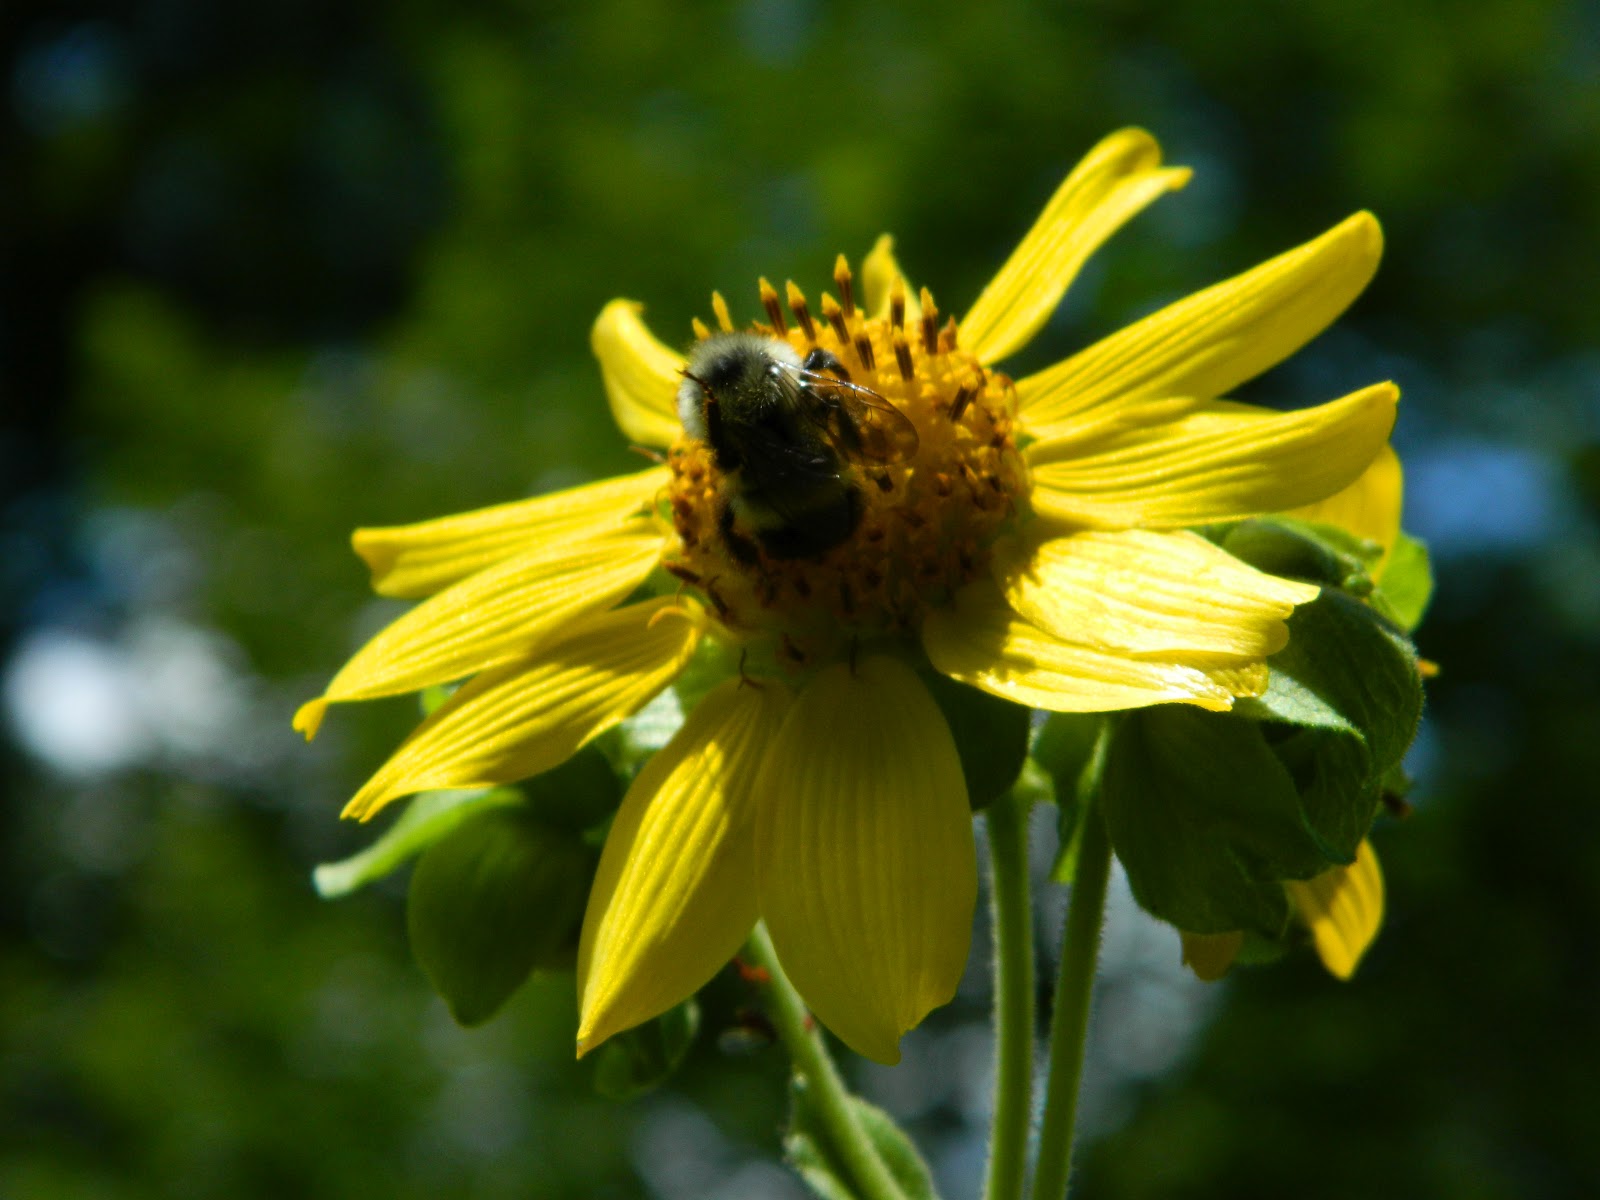 Lise's Log Cabin Life: Lot's of Pollinating Going On